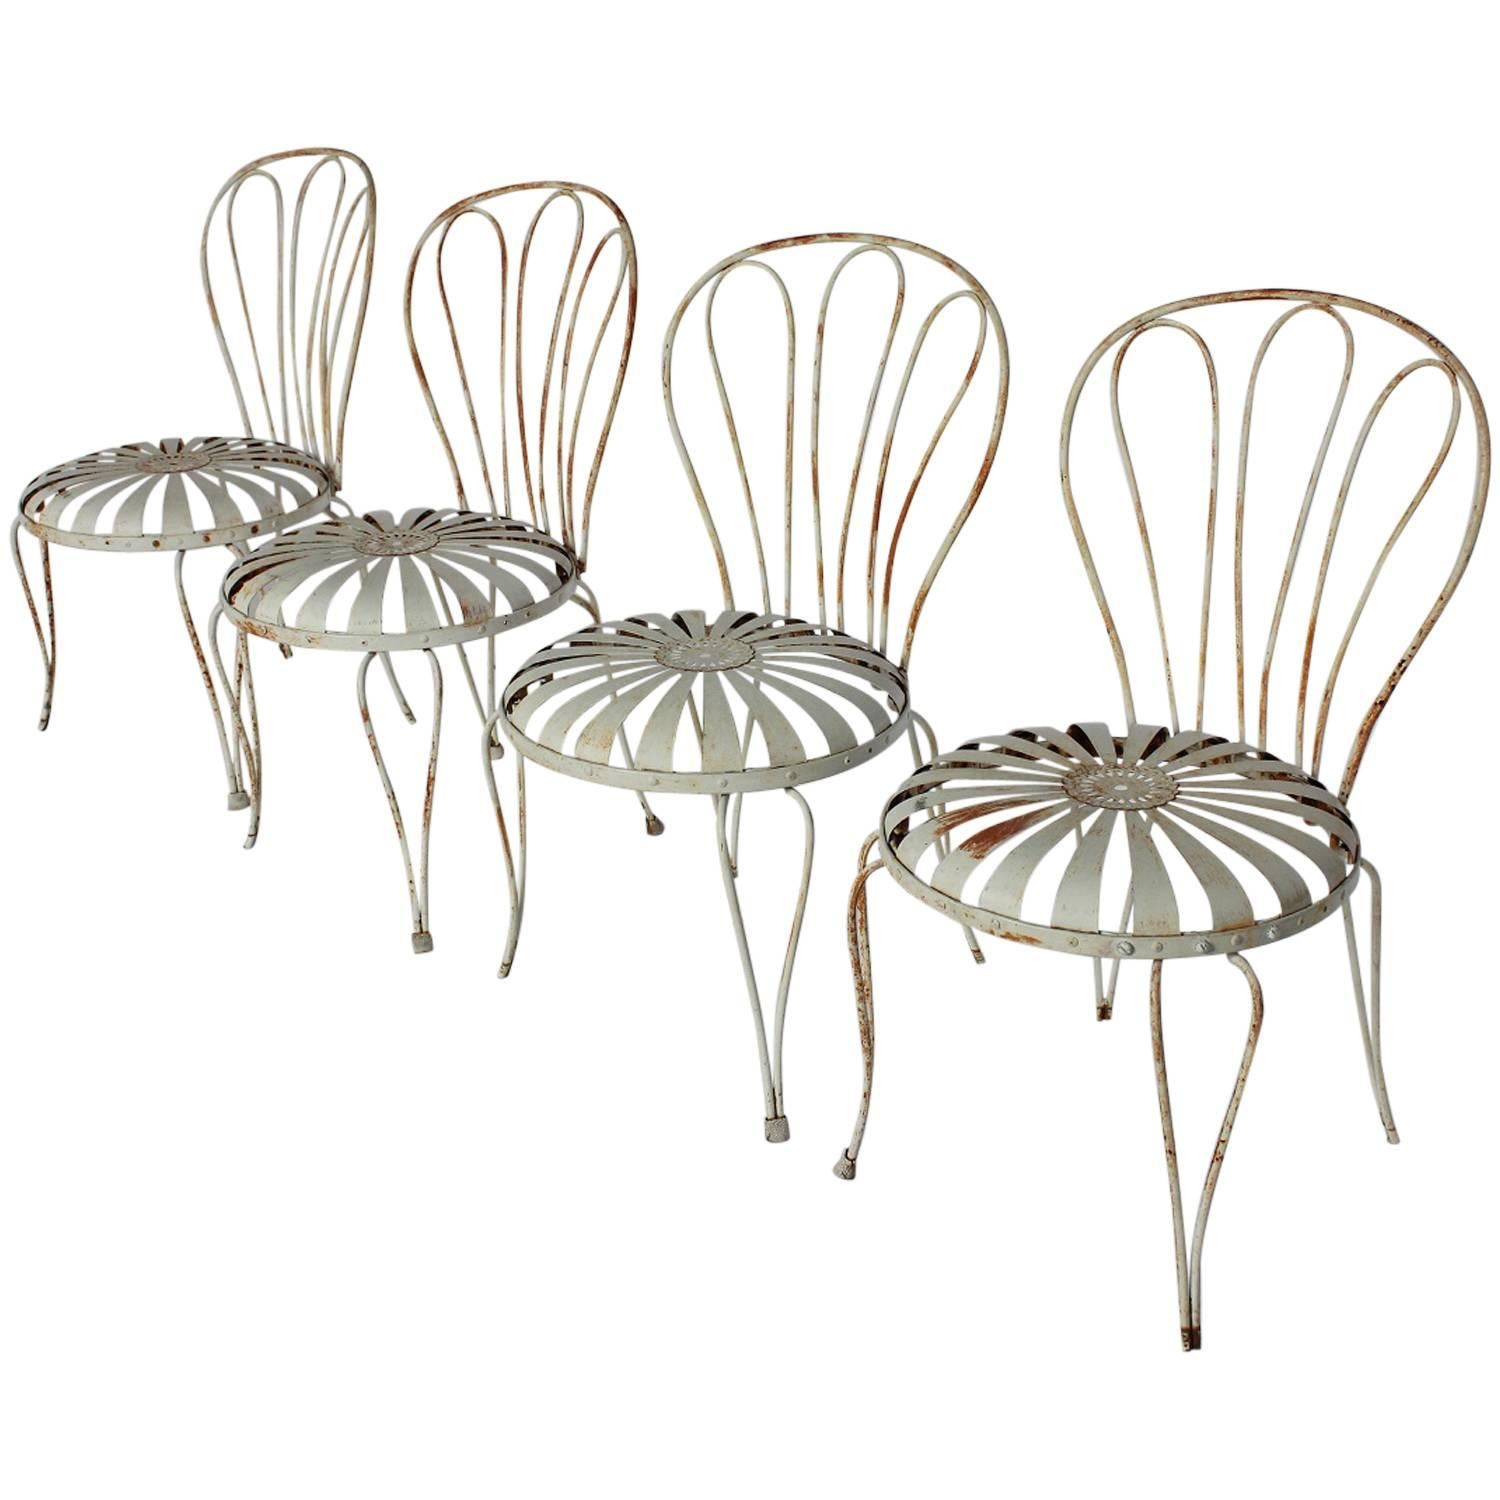 1930s French Sunburst Garden Chairs by Francois Carre For Sale